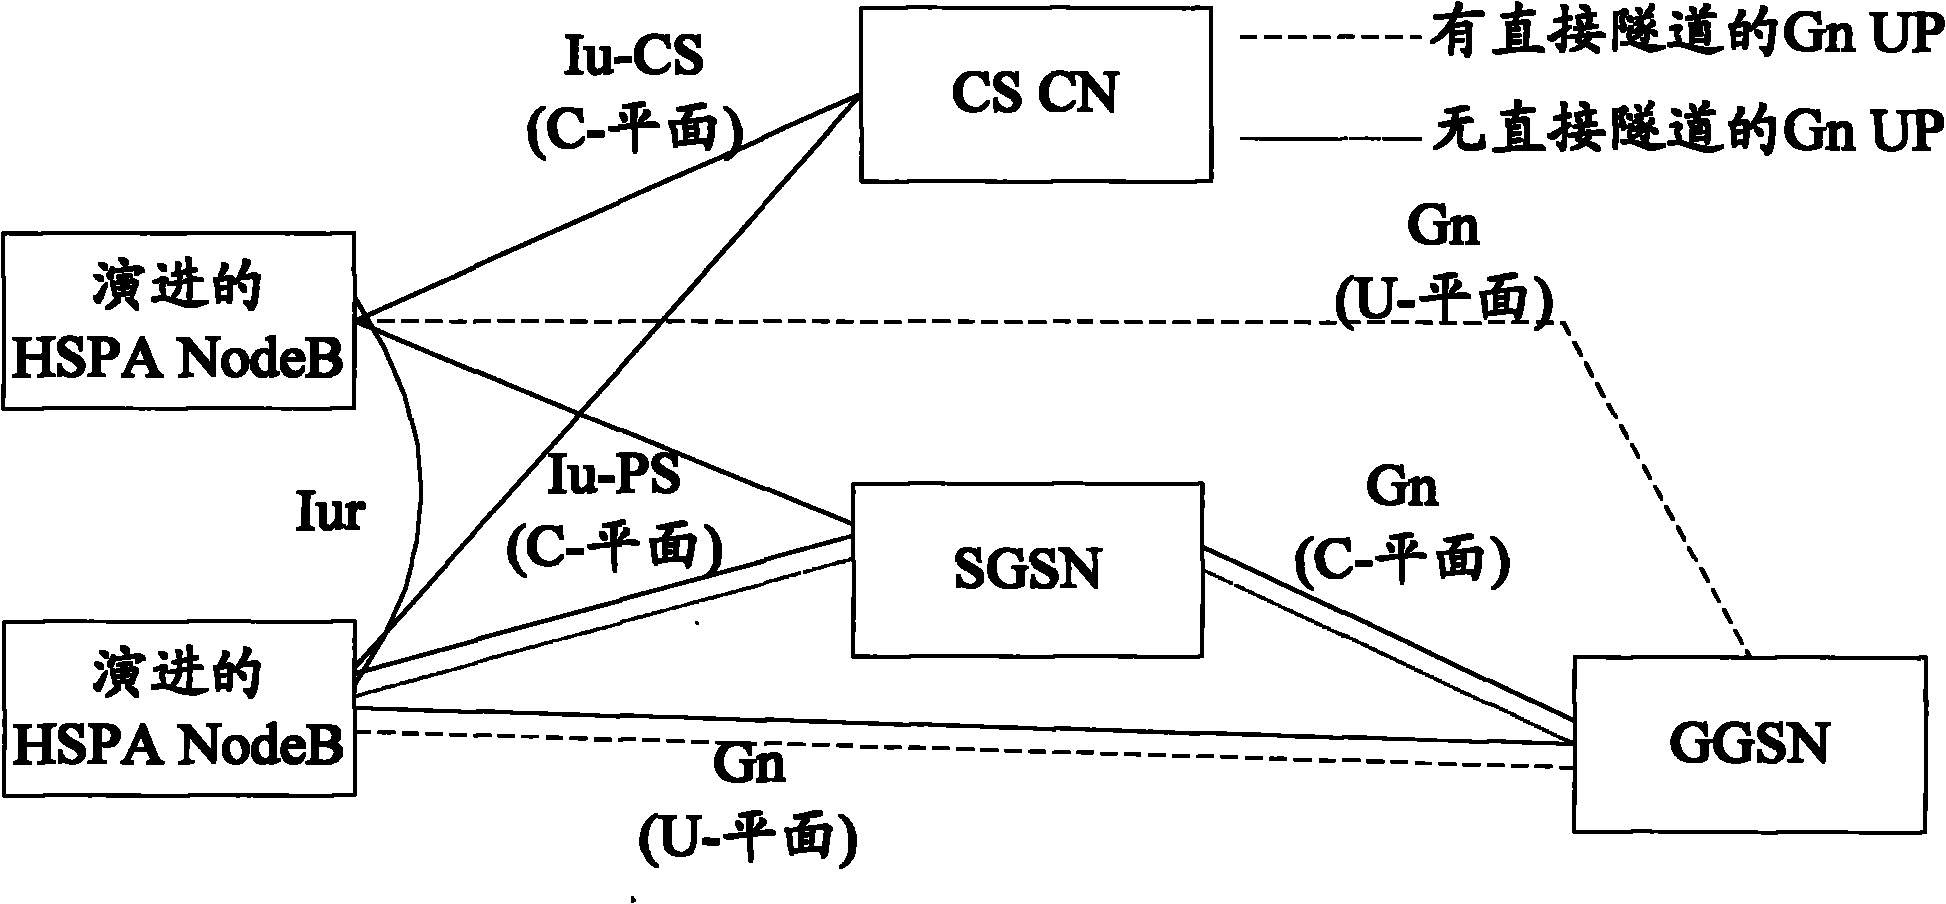 Method and system for creating secret key as interconnecting GERAN with enhanced UTRAN